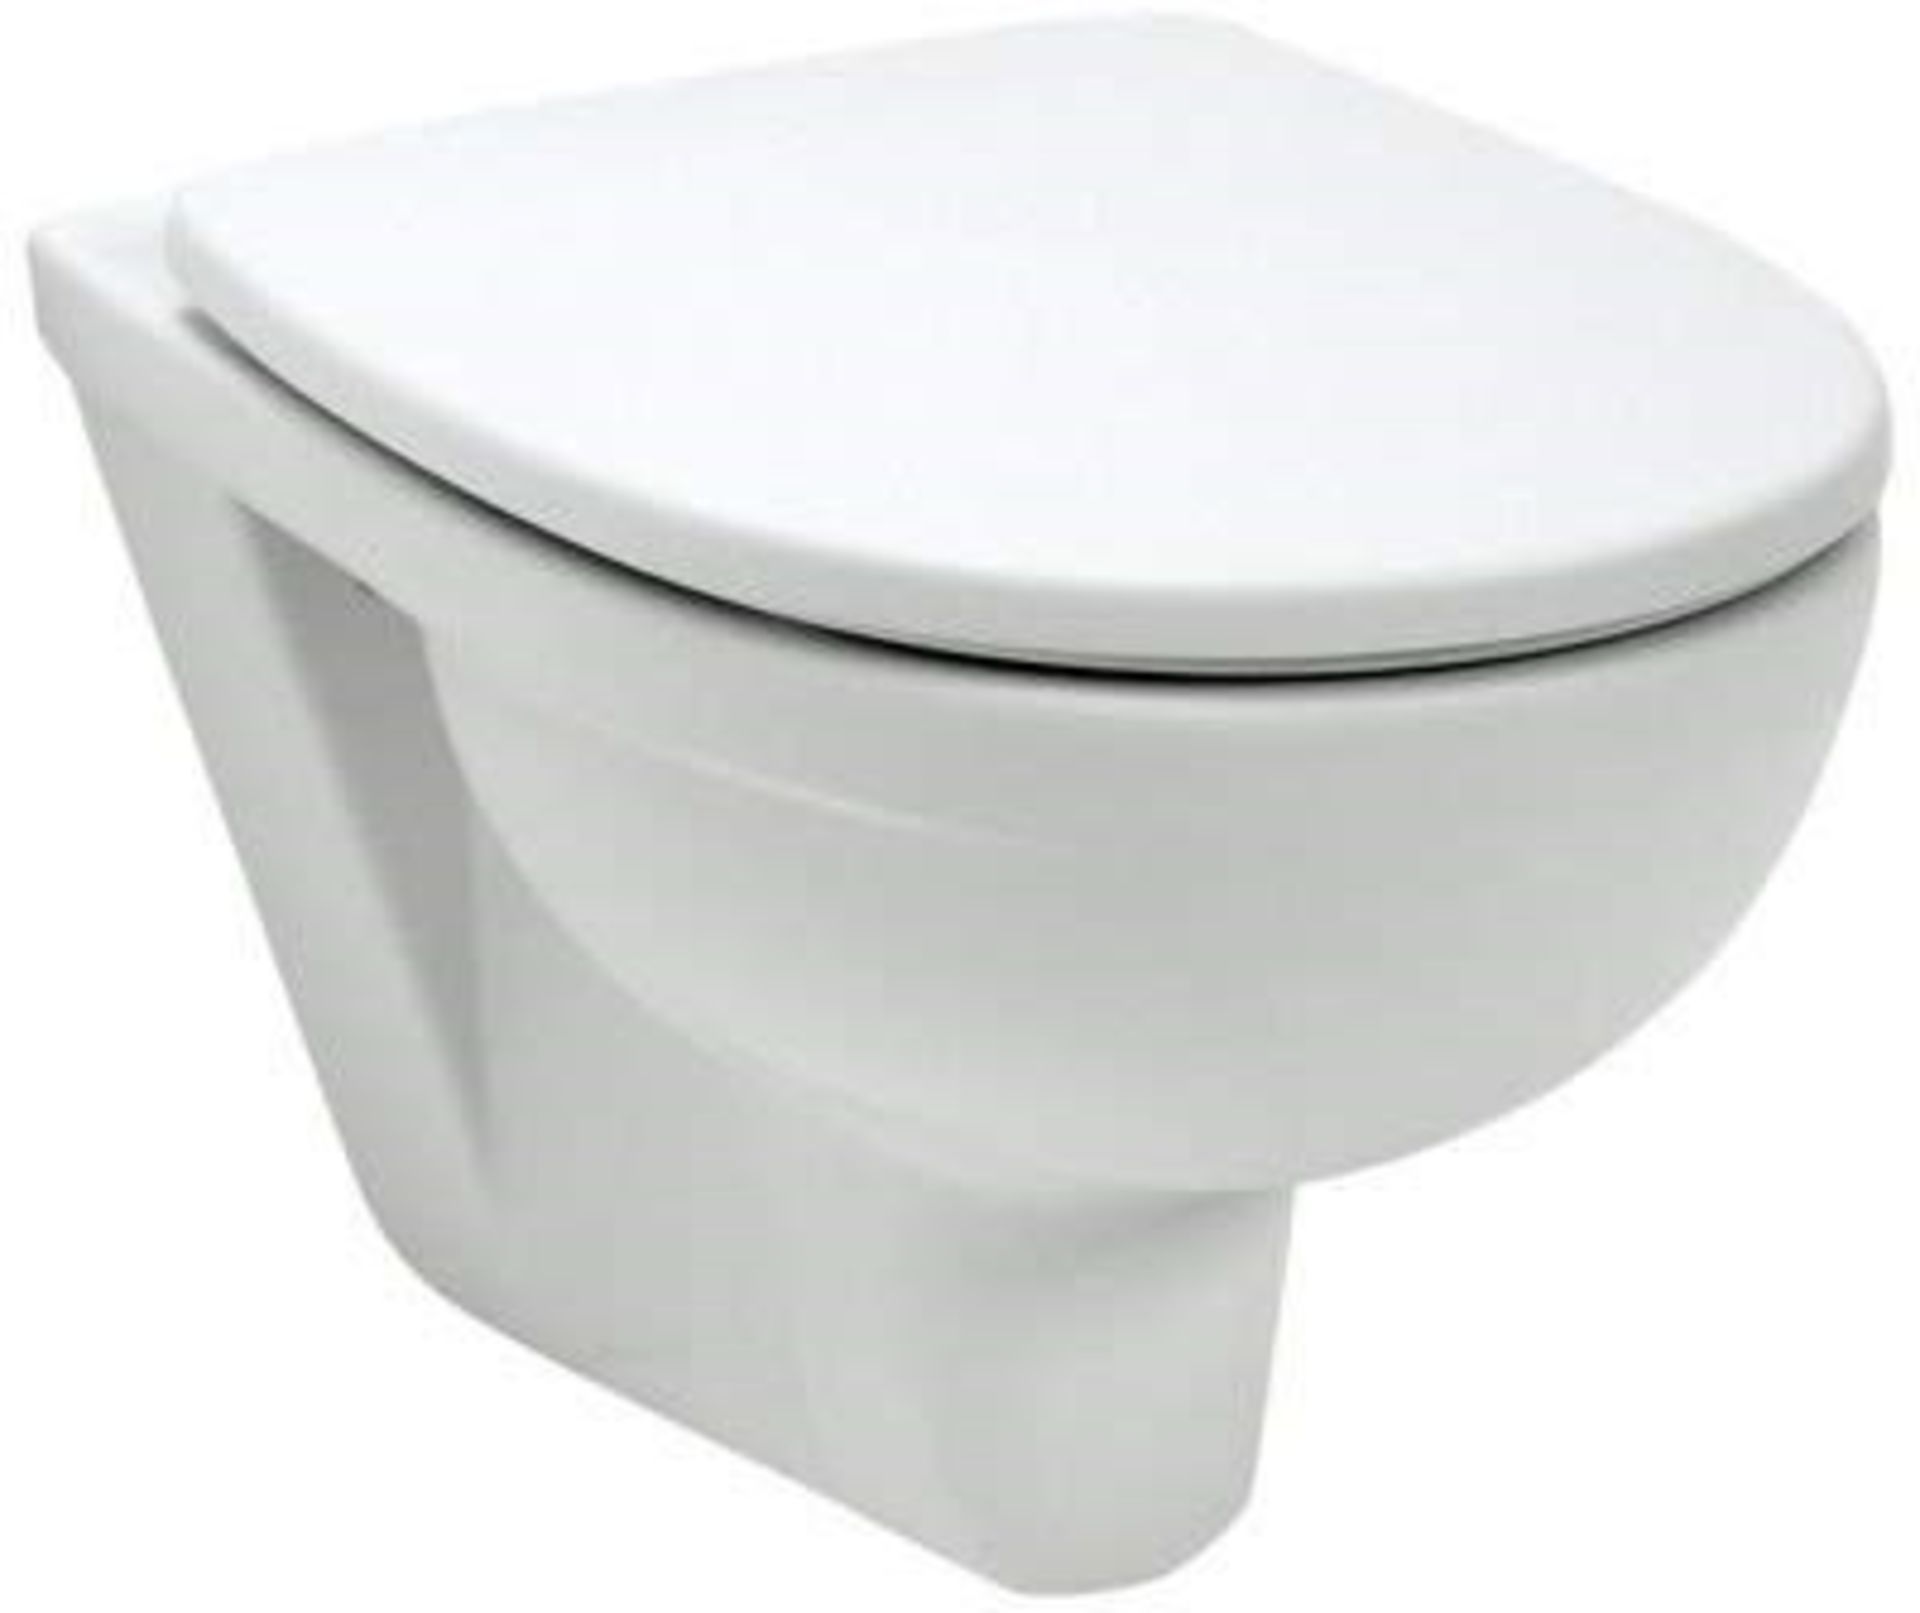 NEW Twyford White Refresh Back to Wall Toilet, Floor Mounted Refresh Back to Wall Toilet.Seat n... - Image 2 of 2